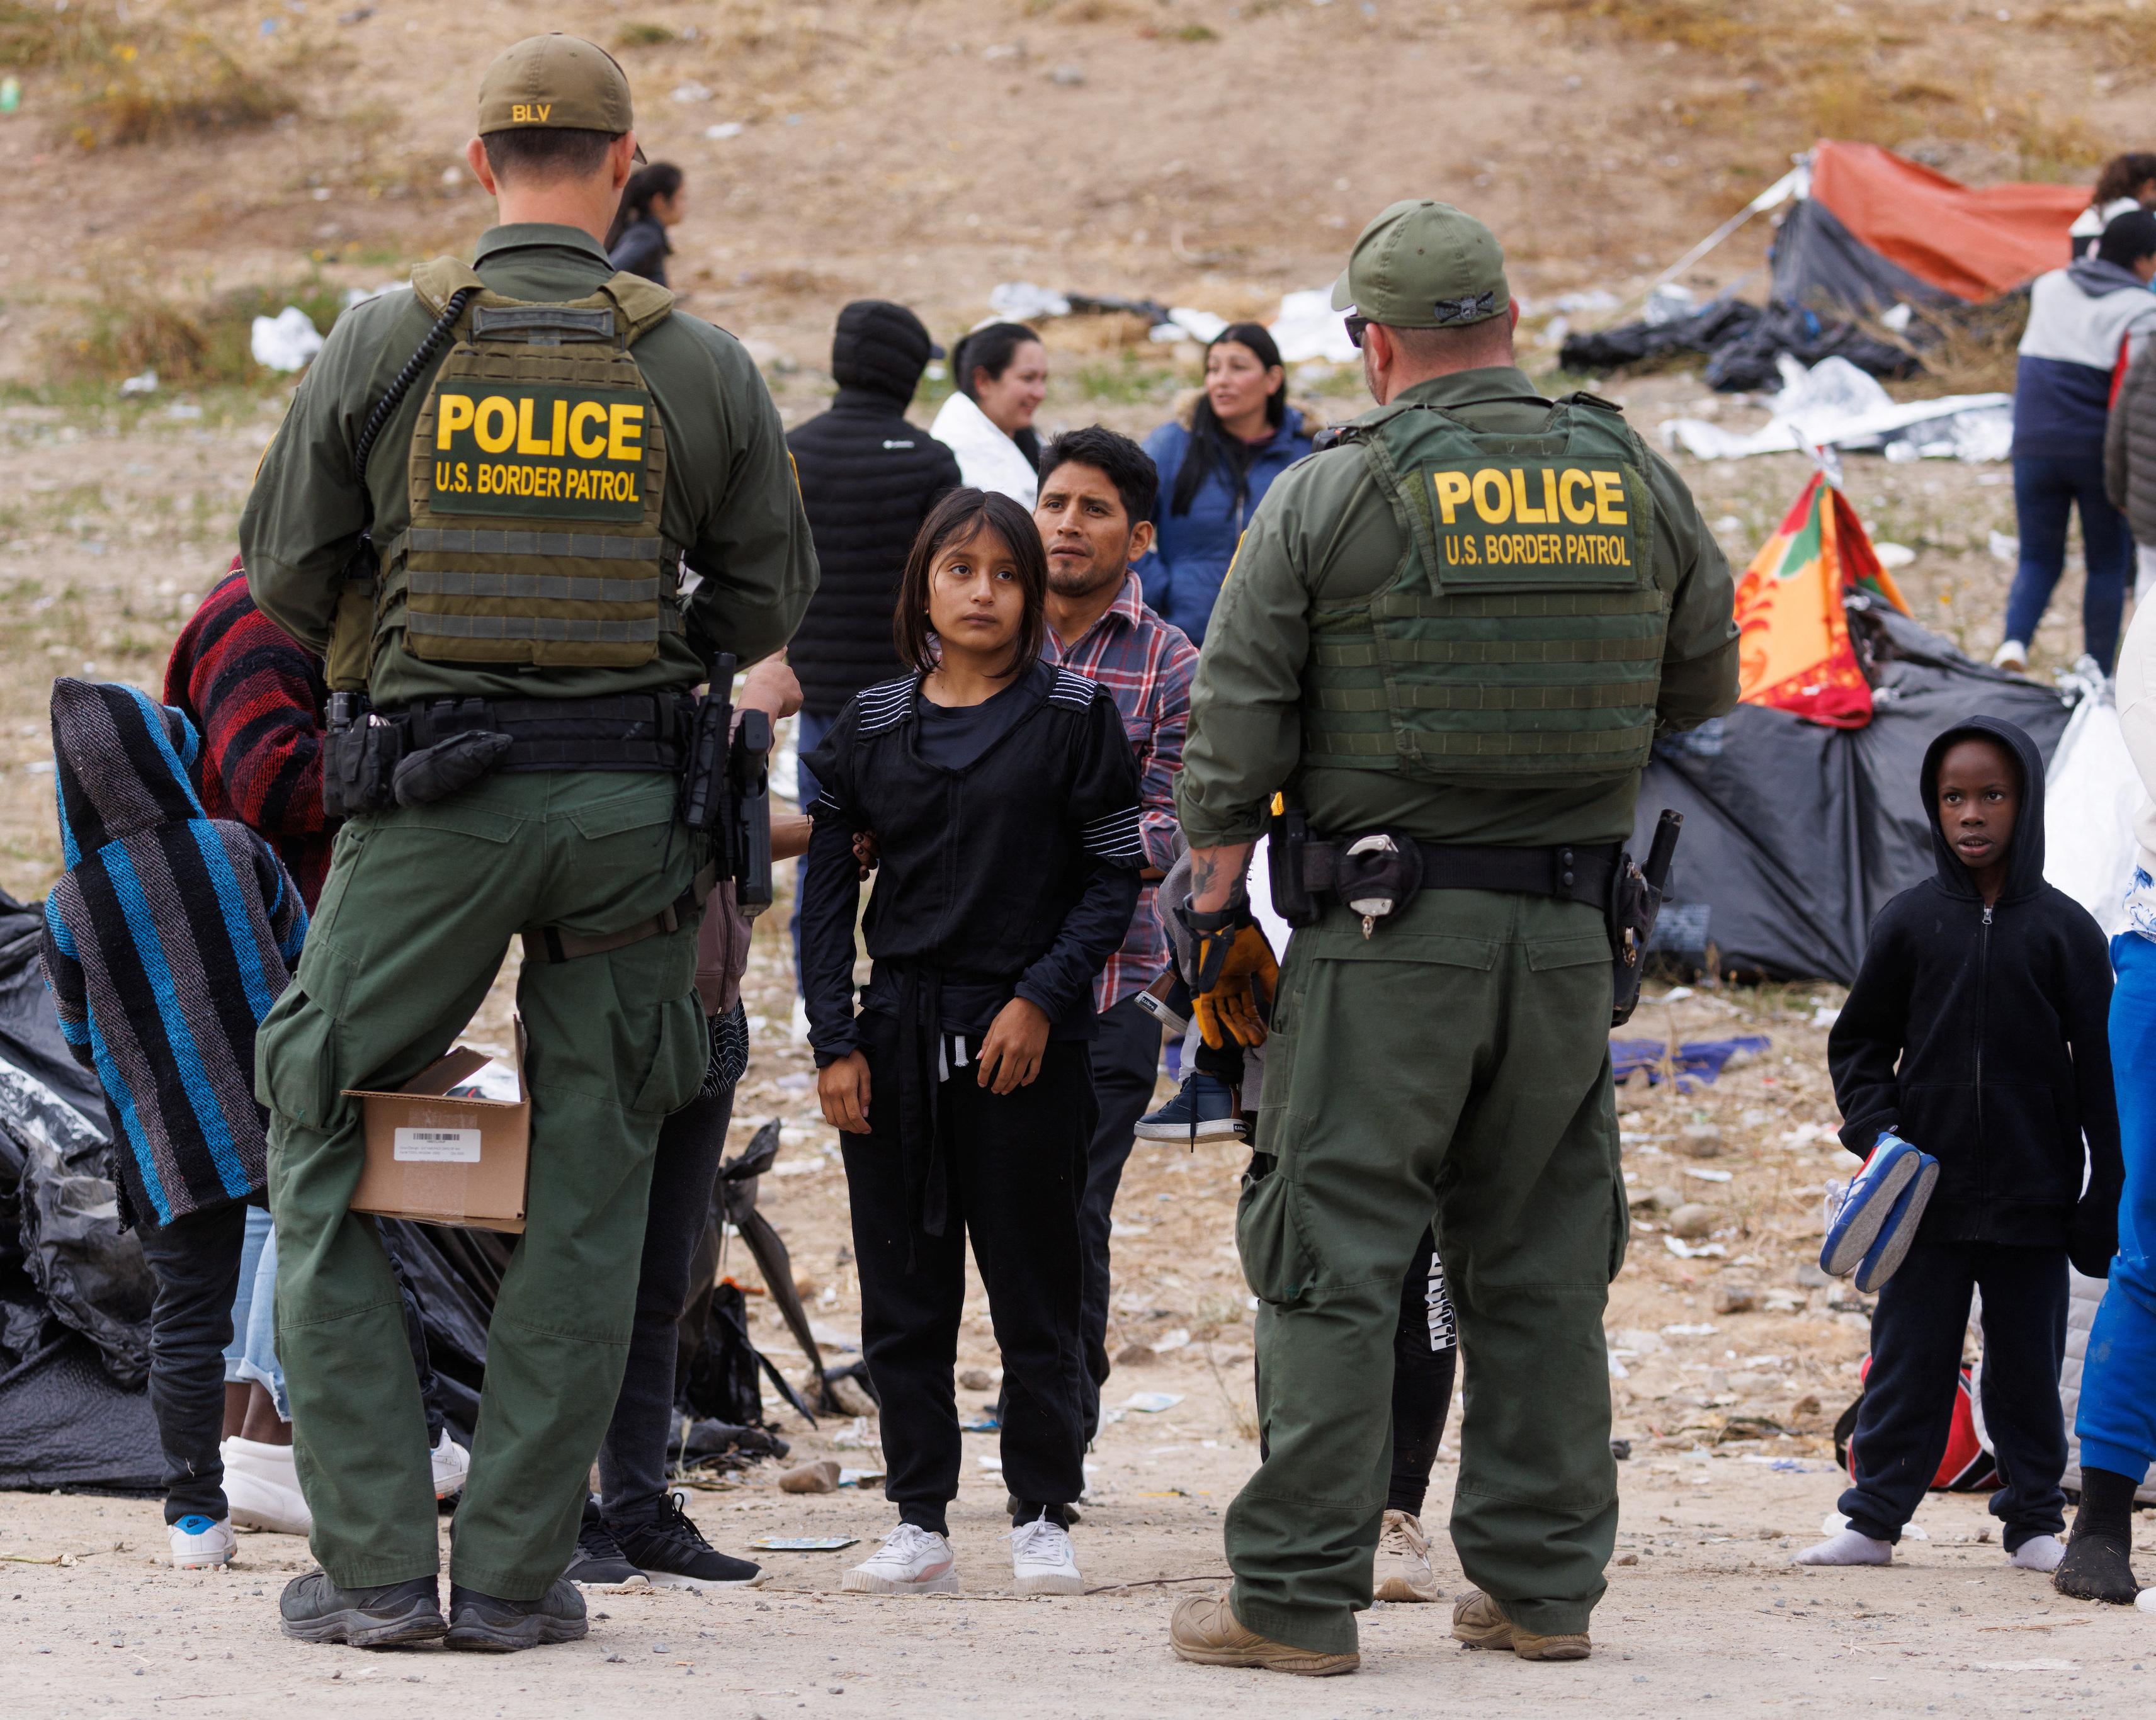 U.S. border patrol agents watch over migrants gathered between the primary and secondary border fences near San Diego, California, as the U.S. prepares to lift COVID-era Title 42 restrictions